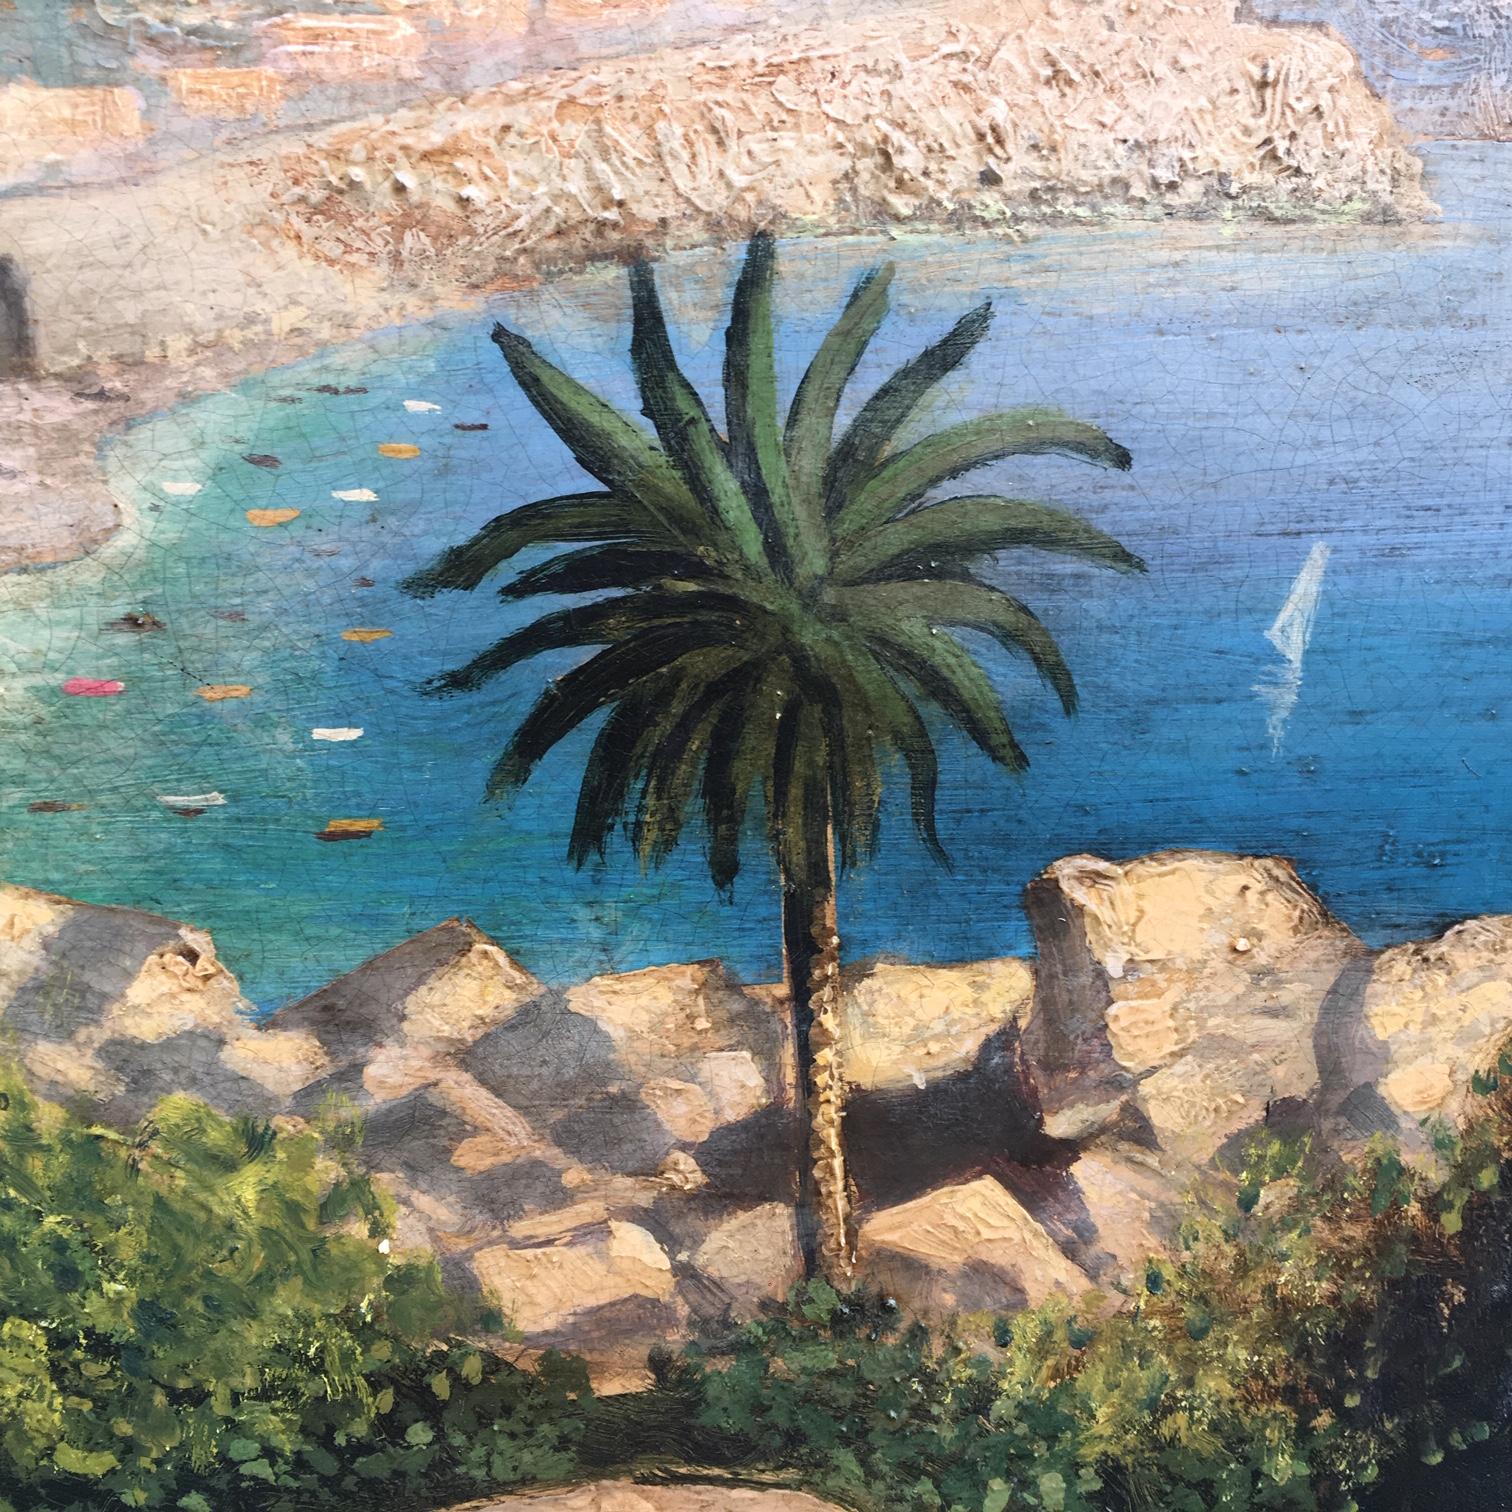 Coast - Oil on canvas cm. 60x120 by Paolo De Robertis, Italy 2008.  
The painting is inspired by the canvases of the school of Posillipo by Consalvo Carelli designer, illustrator and painter of landscapes with particular reference to Naples and the